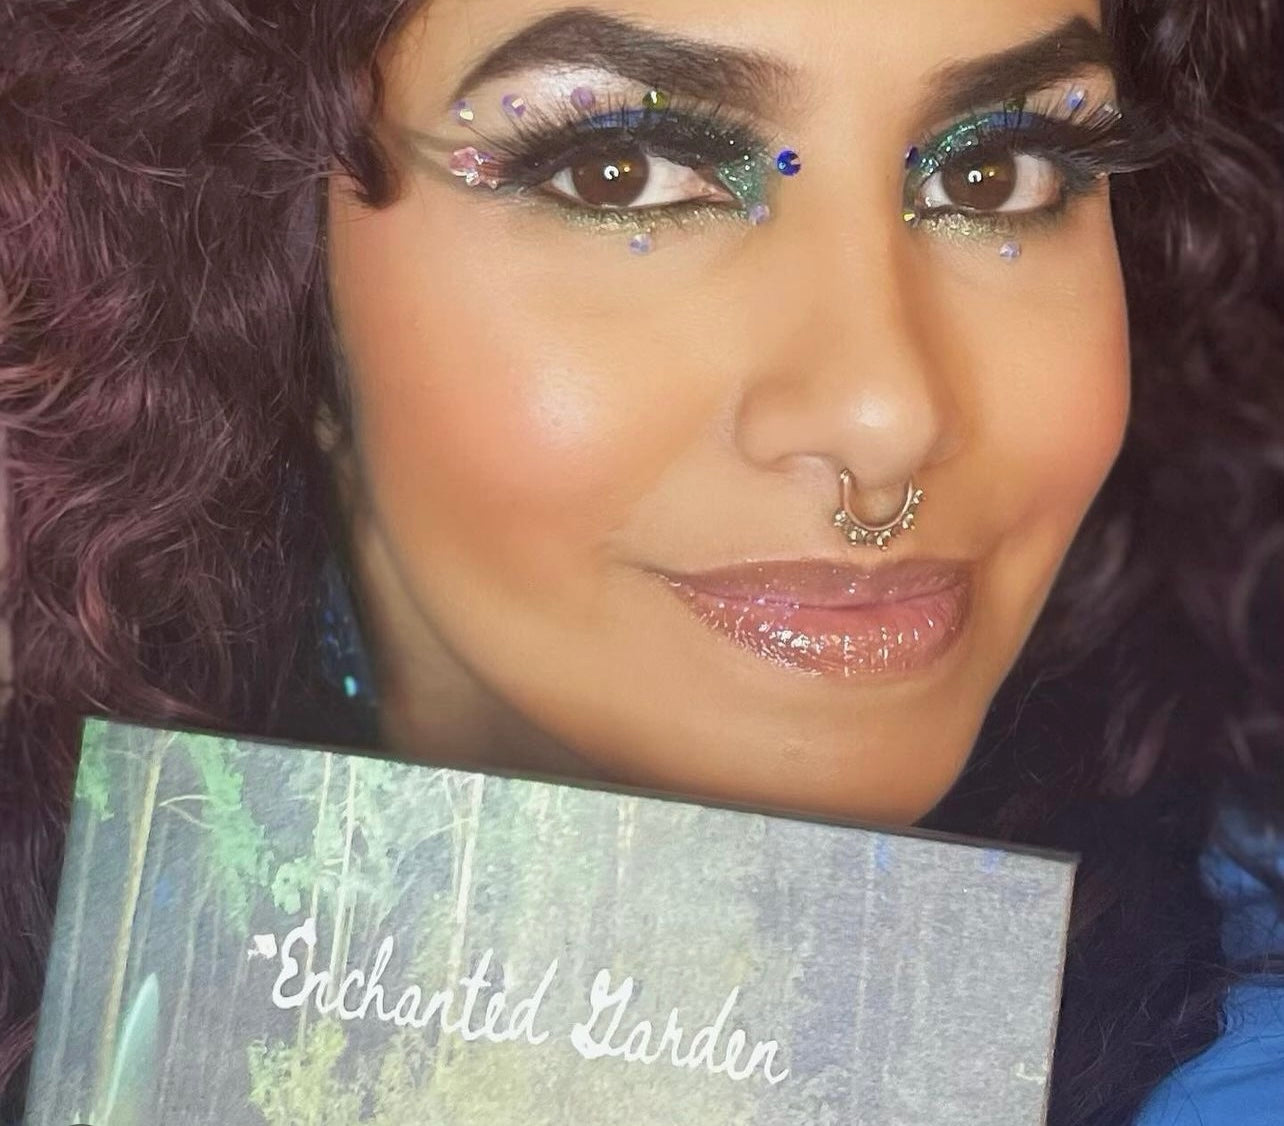 “Enchanted Garden” Green/Blue color story 12 shade eyeshadow palette